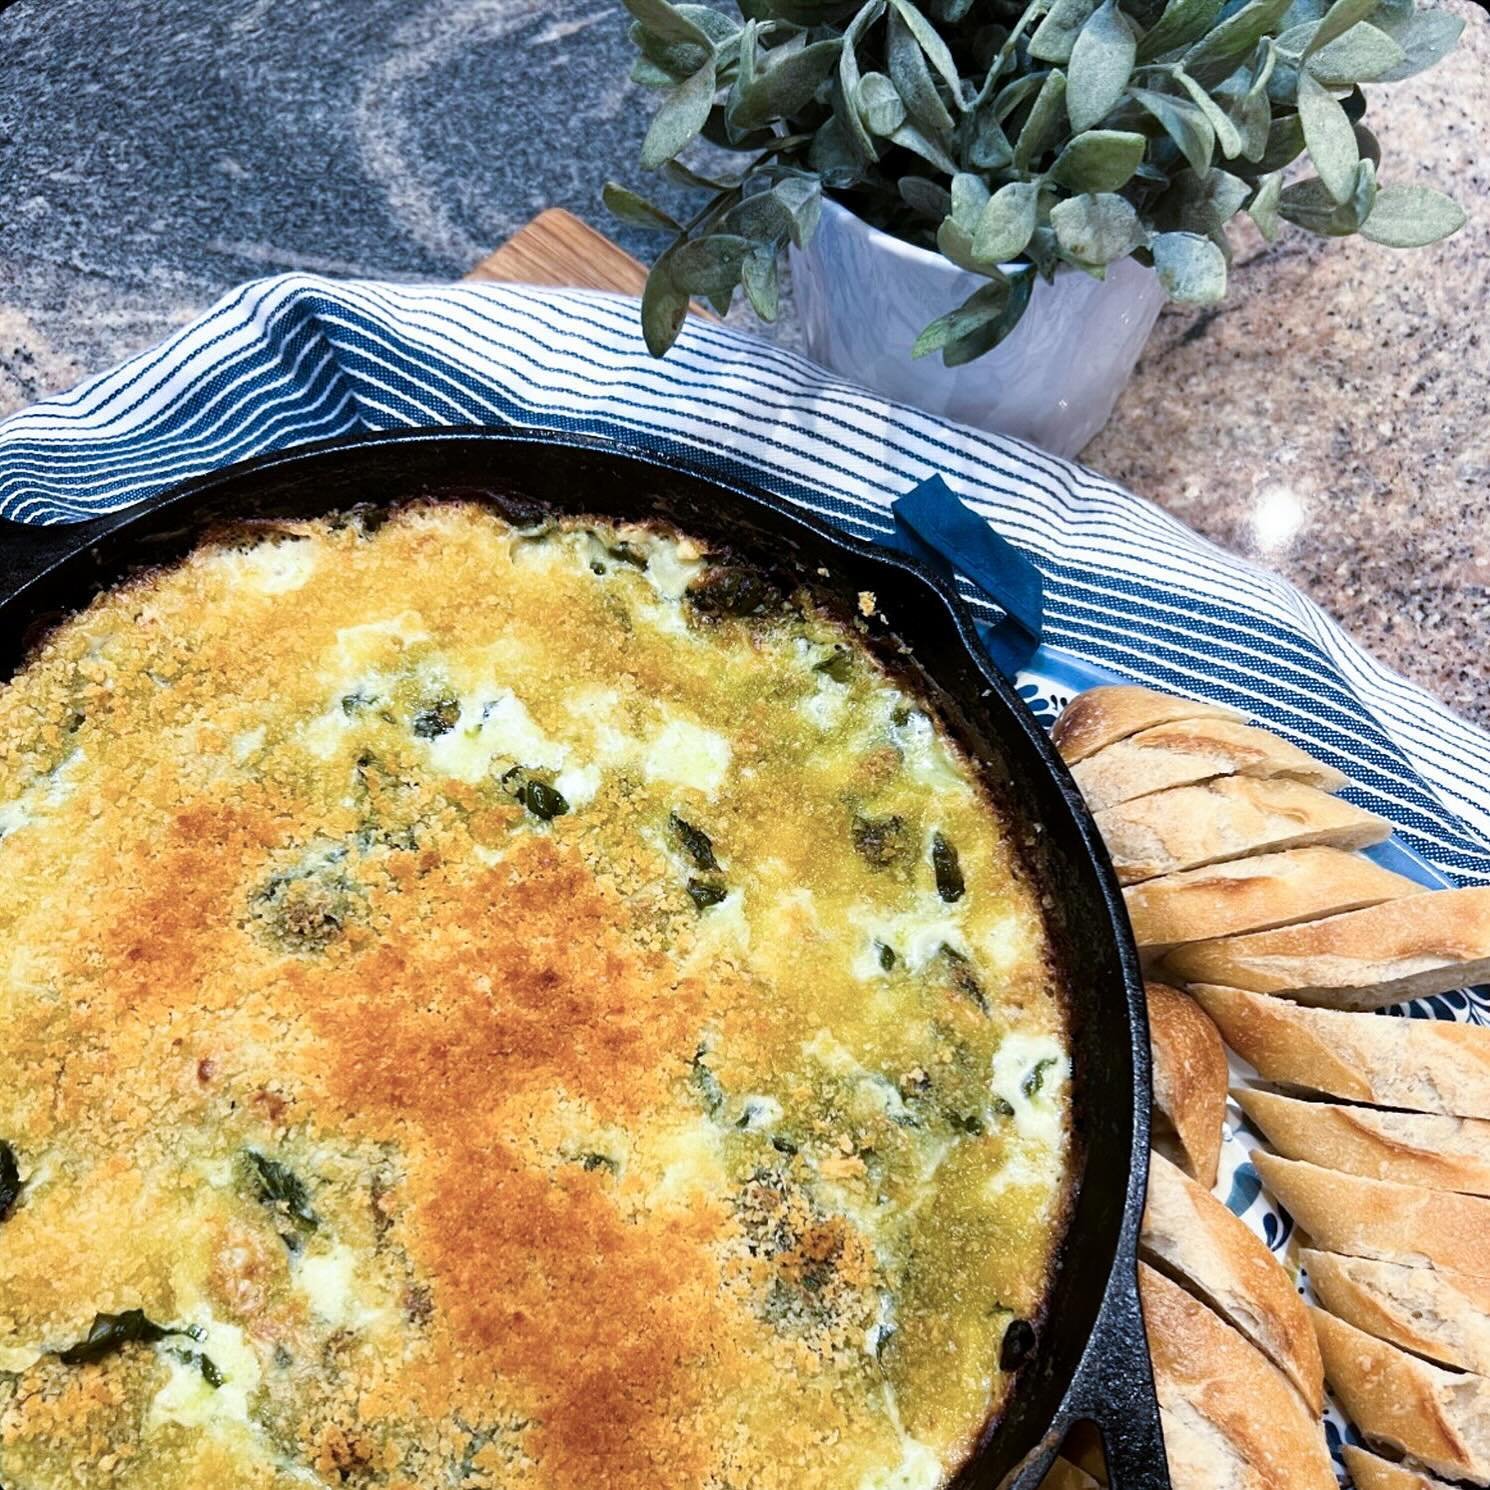 Lobster spinach dip&hellip; kinda a perfect Sunday snack

full recipe on lindsayEats.com
link in bio @_lindsayeats_ 

#lobster #spinach #waterchestnuts #mornay #cheese #dip #soreads #spinachdip #cheesedip #snacks #foodinspo #recipeinspo #recipe #allr